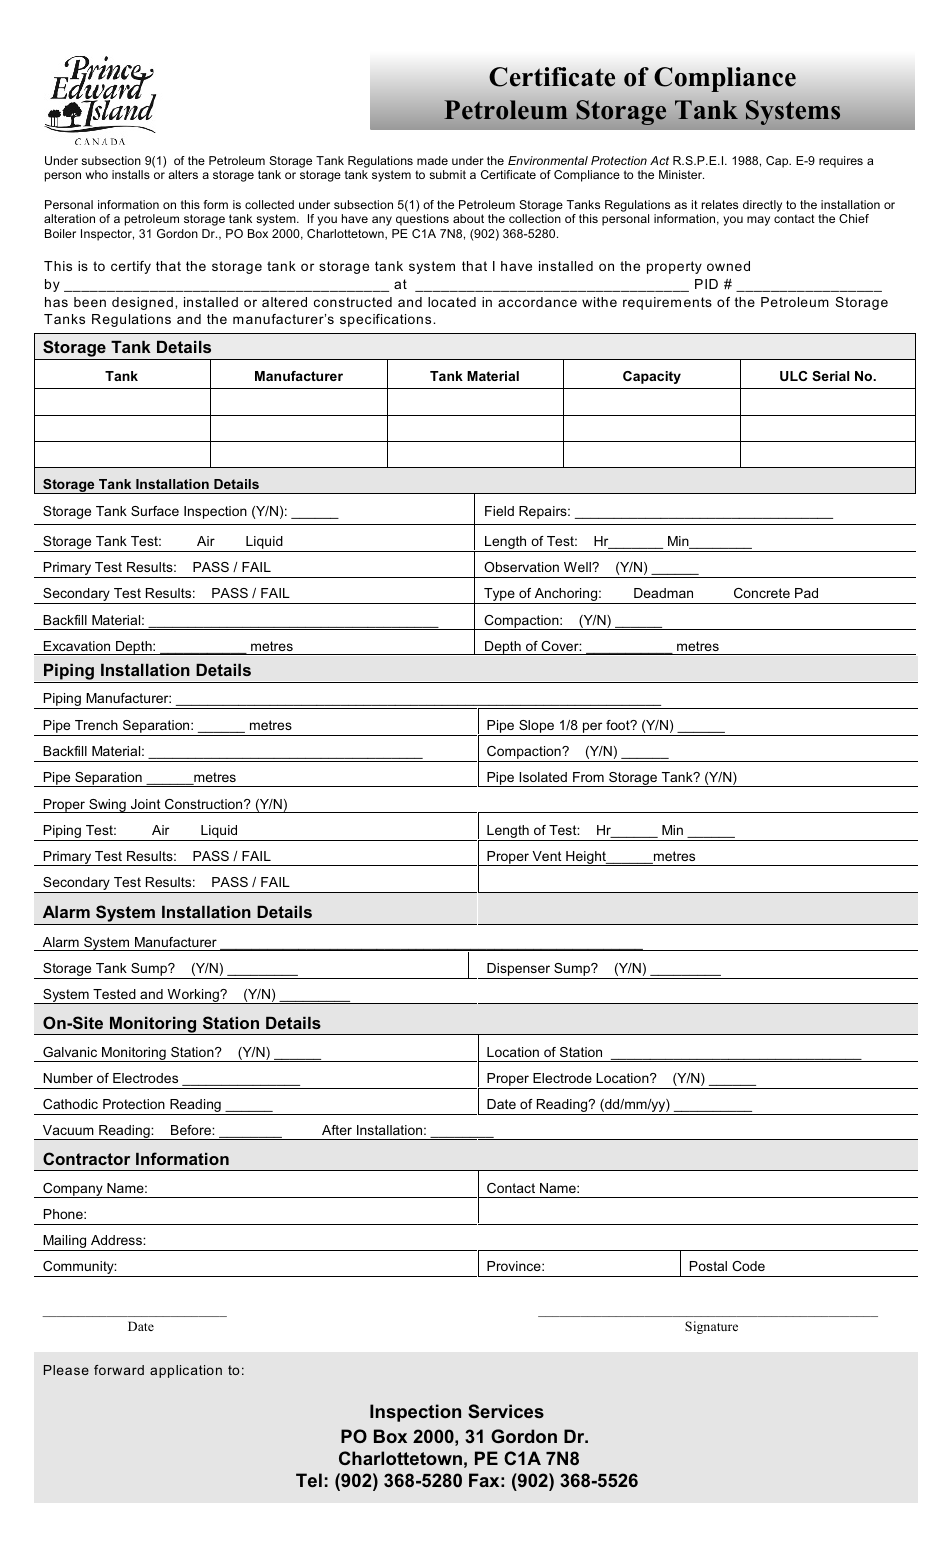 Certificate of Compliance Petroleum Storage Tank Systems - Prince Edward Island, Canada, Page 1